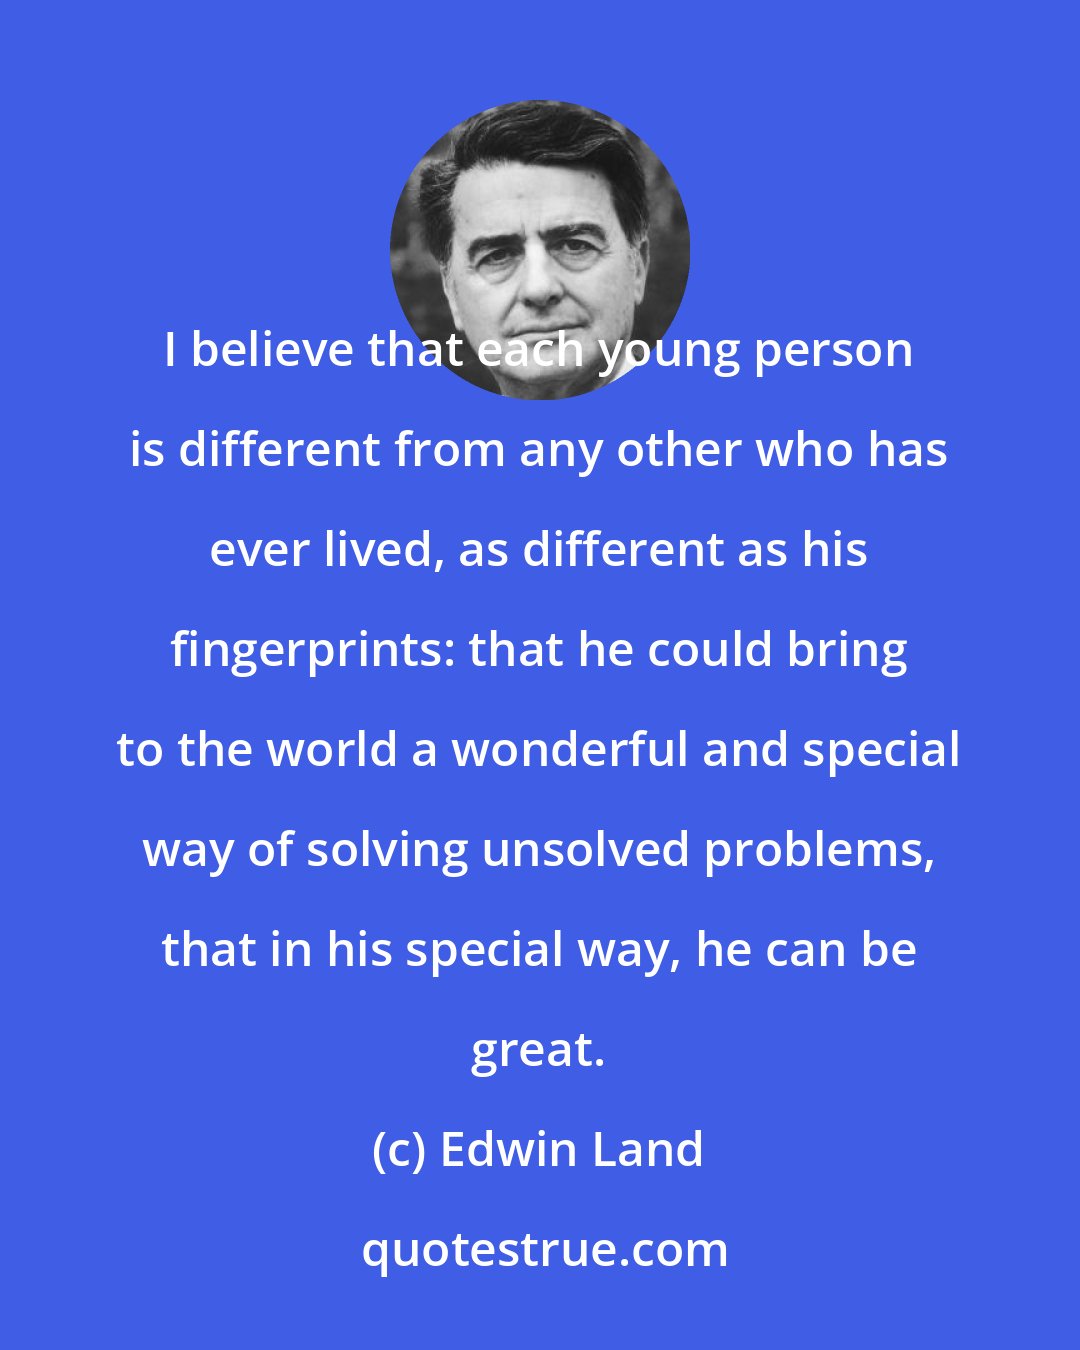 Edwin Land: I believe that each young person is different from any other who has ever lived, as different as his fingerprints: that he could bring to the world a wonderful and special way of solving unsolved problems, that in his special way, he can be great.